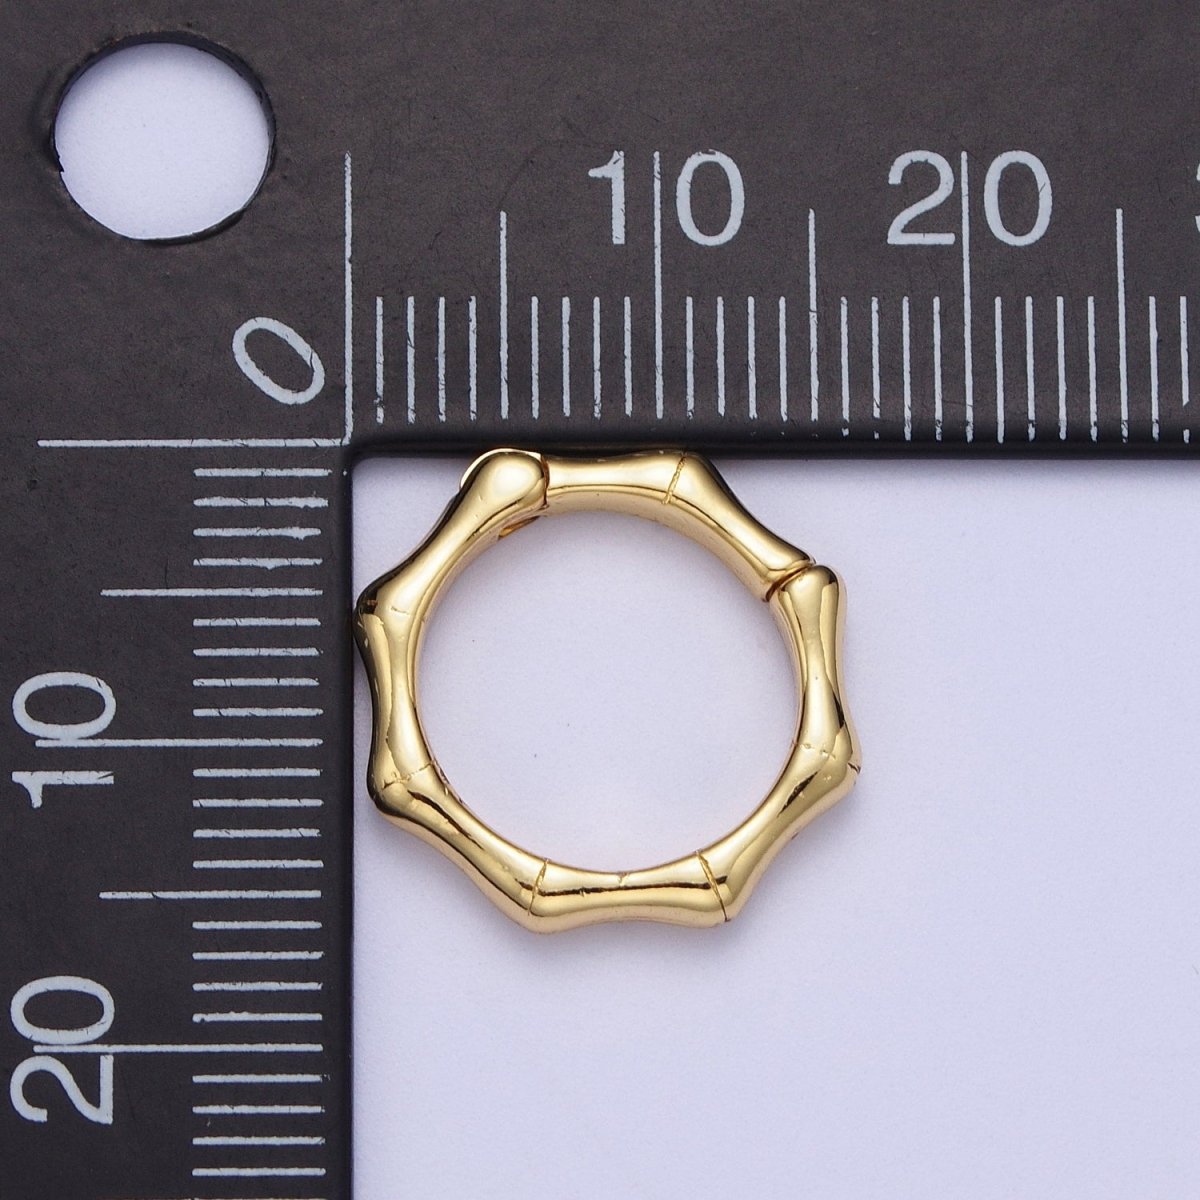 24K Gold Filled Round Bamboo Plant Pull Spring Gate Ring Closure Findings For Jewelry Making L-931 L-932 - DLUXCA